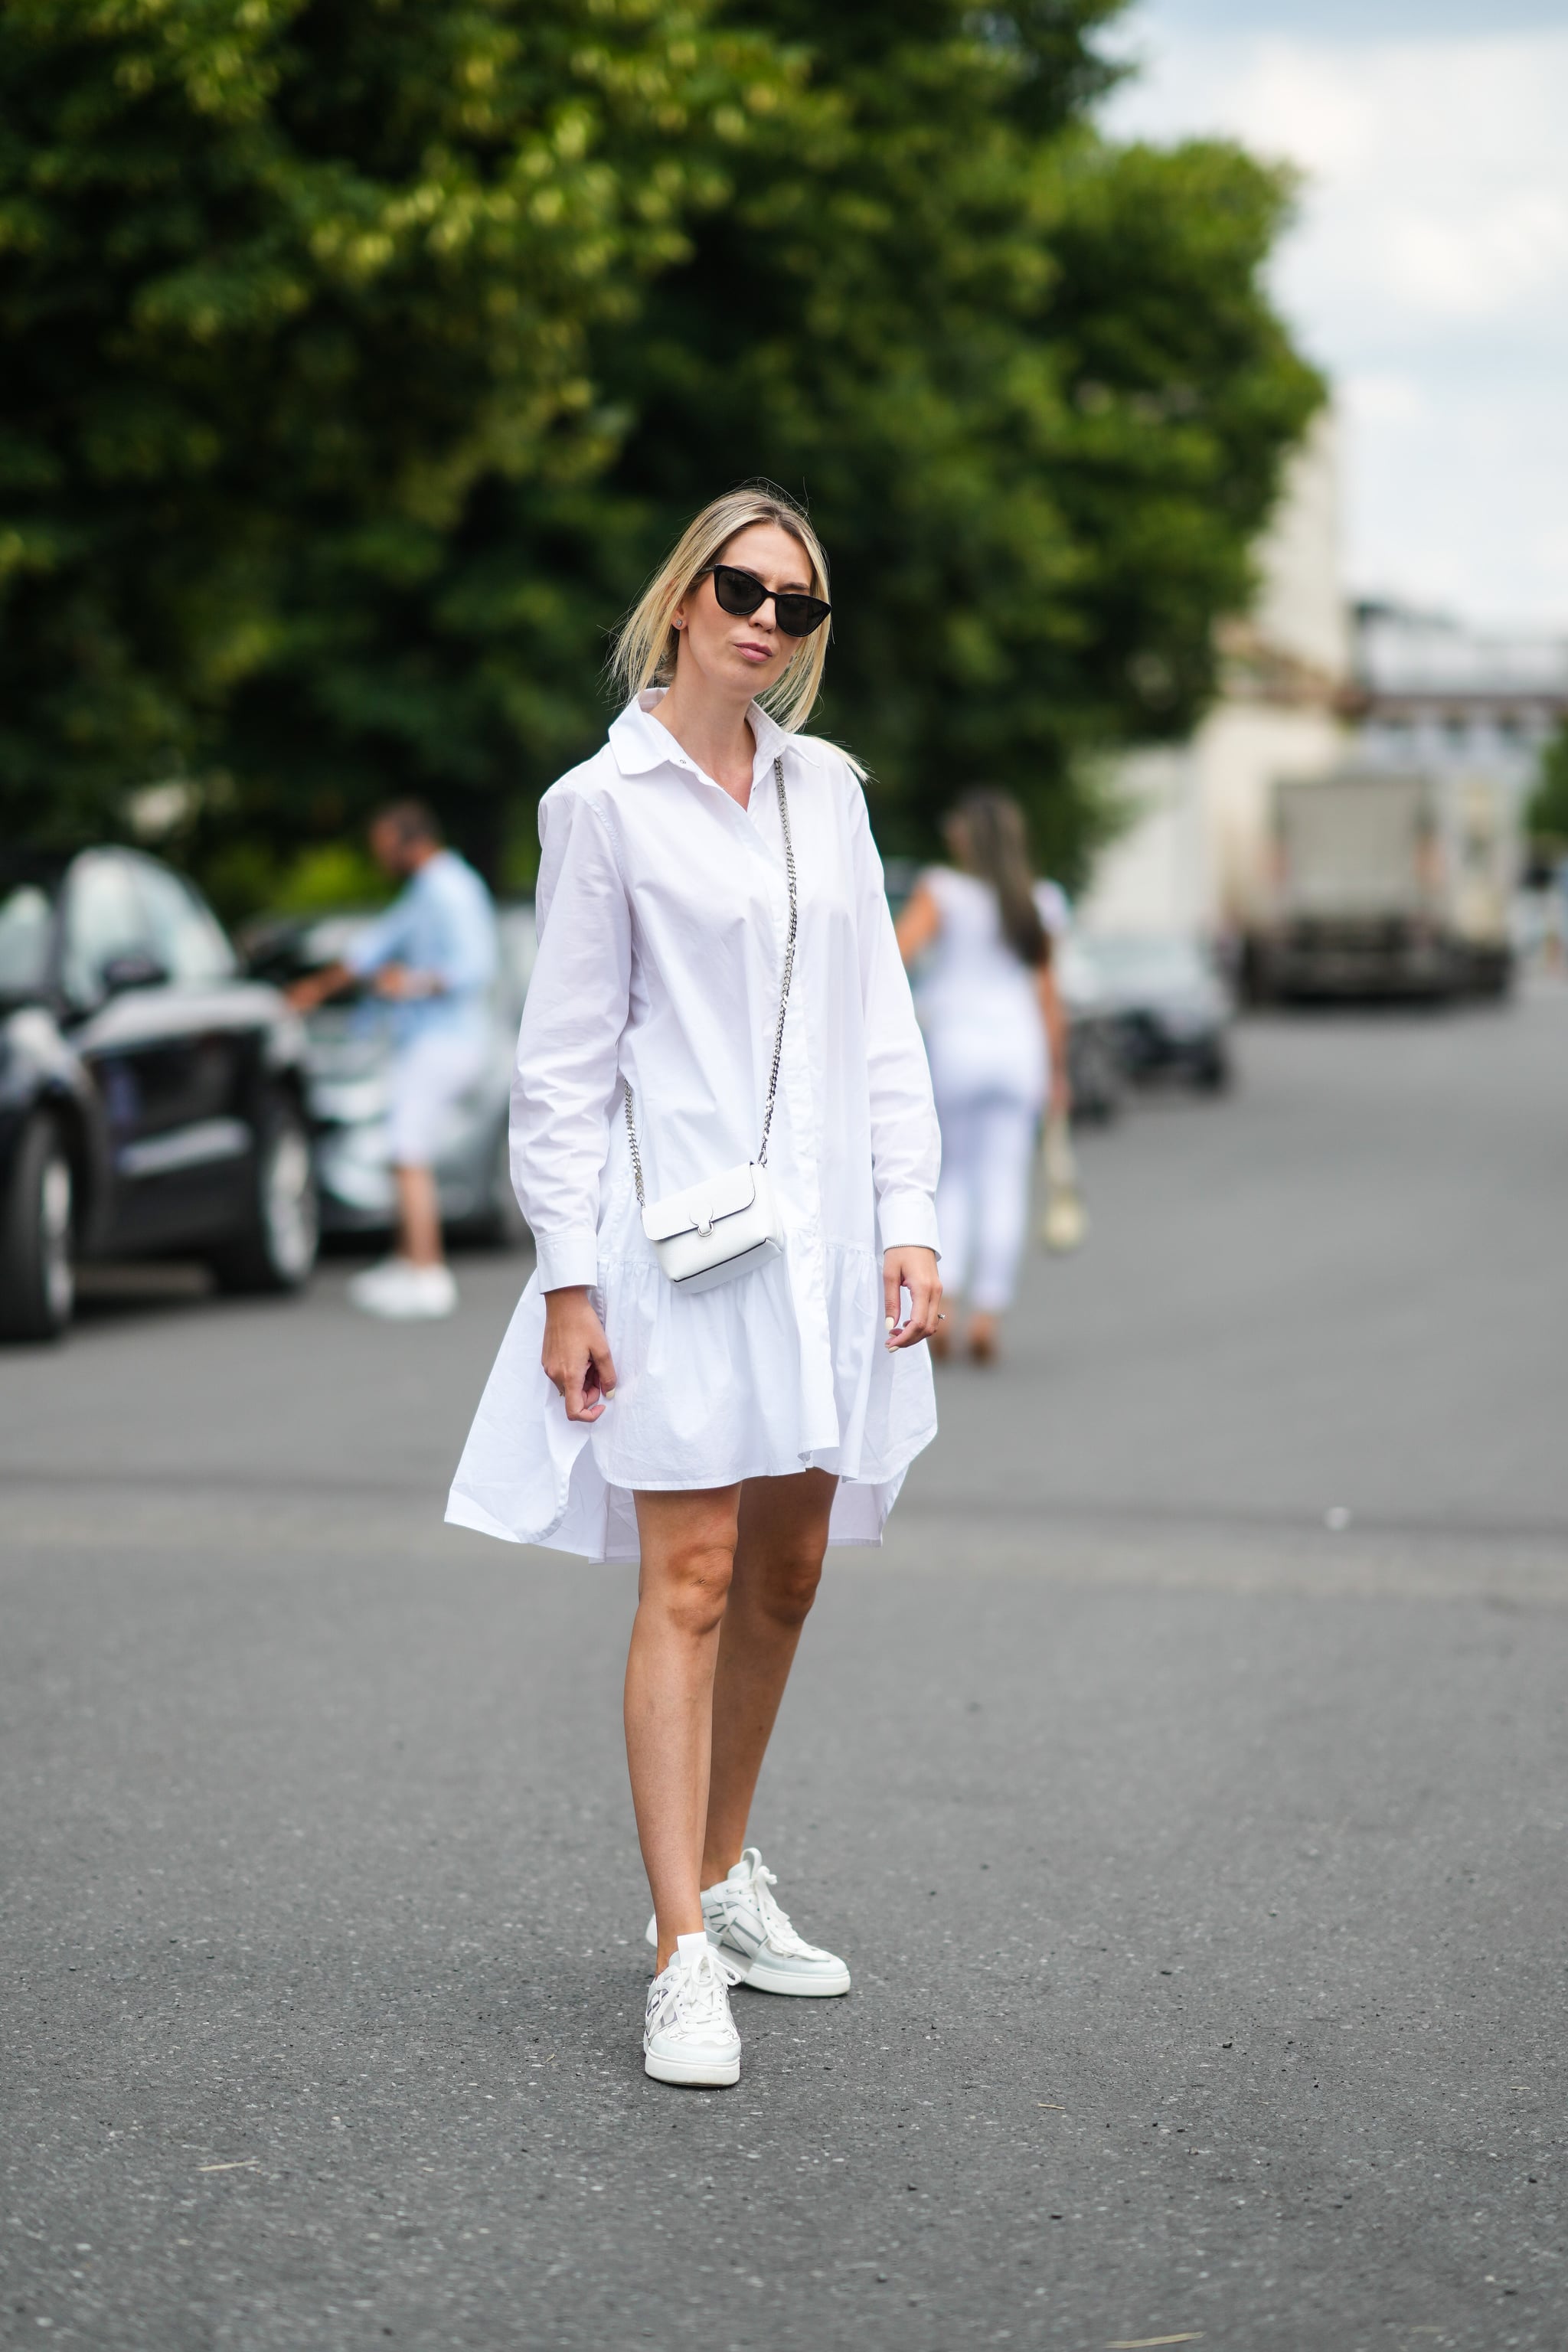 How to Wear a Dress With Sneakers | POPSUGAR Fashion